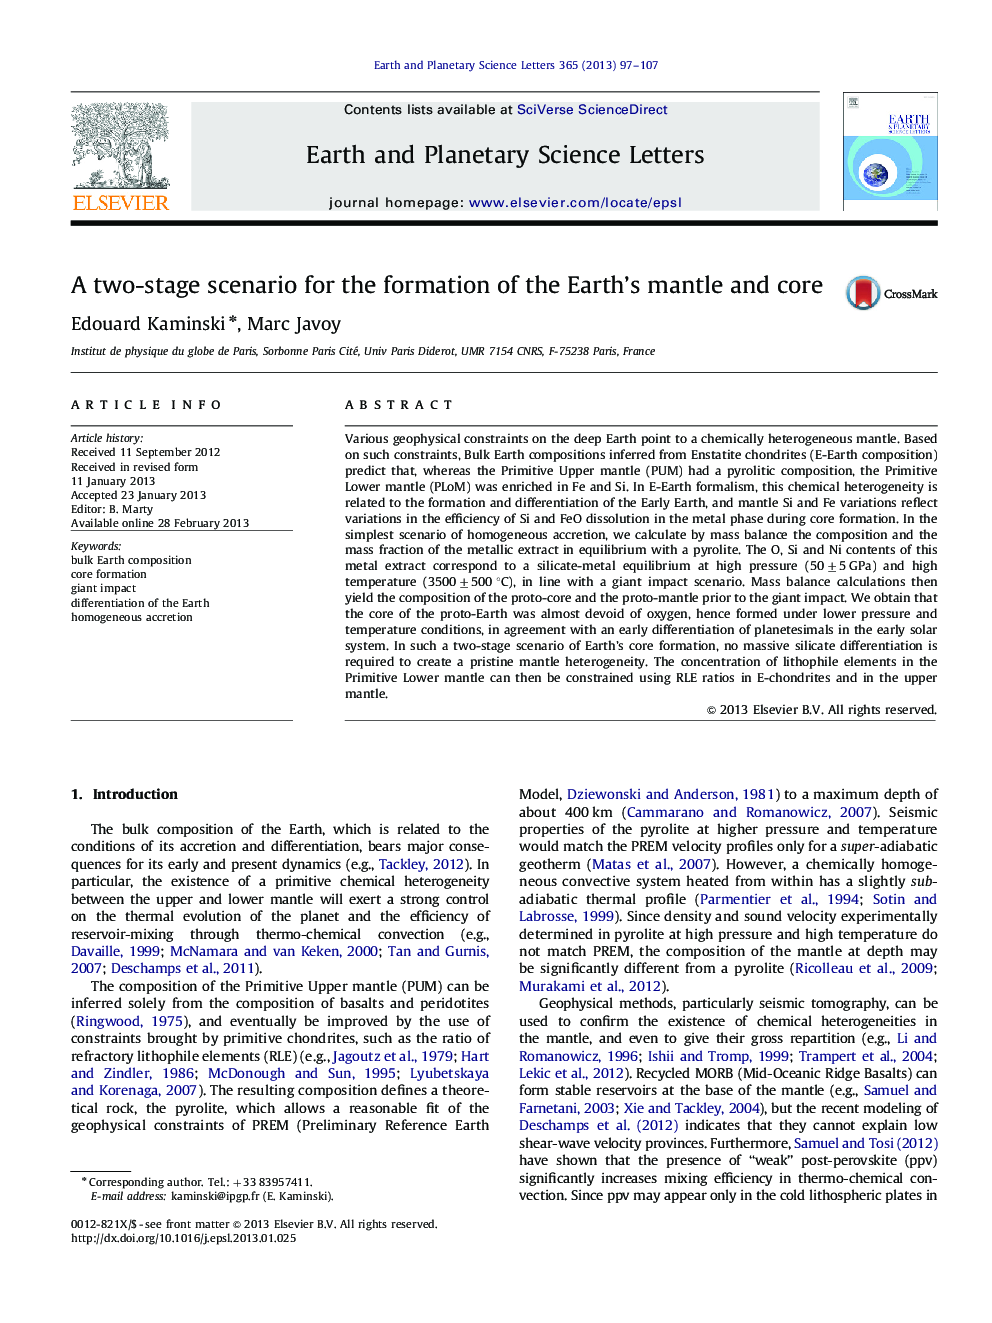 A two-stage scenario for the formation of the Earth's mantle and core